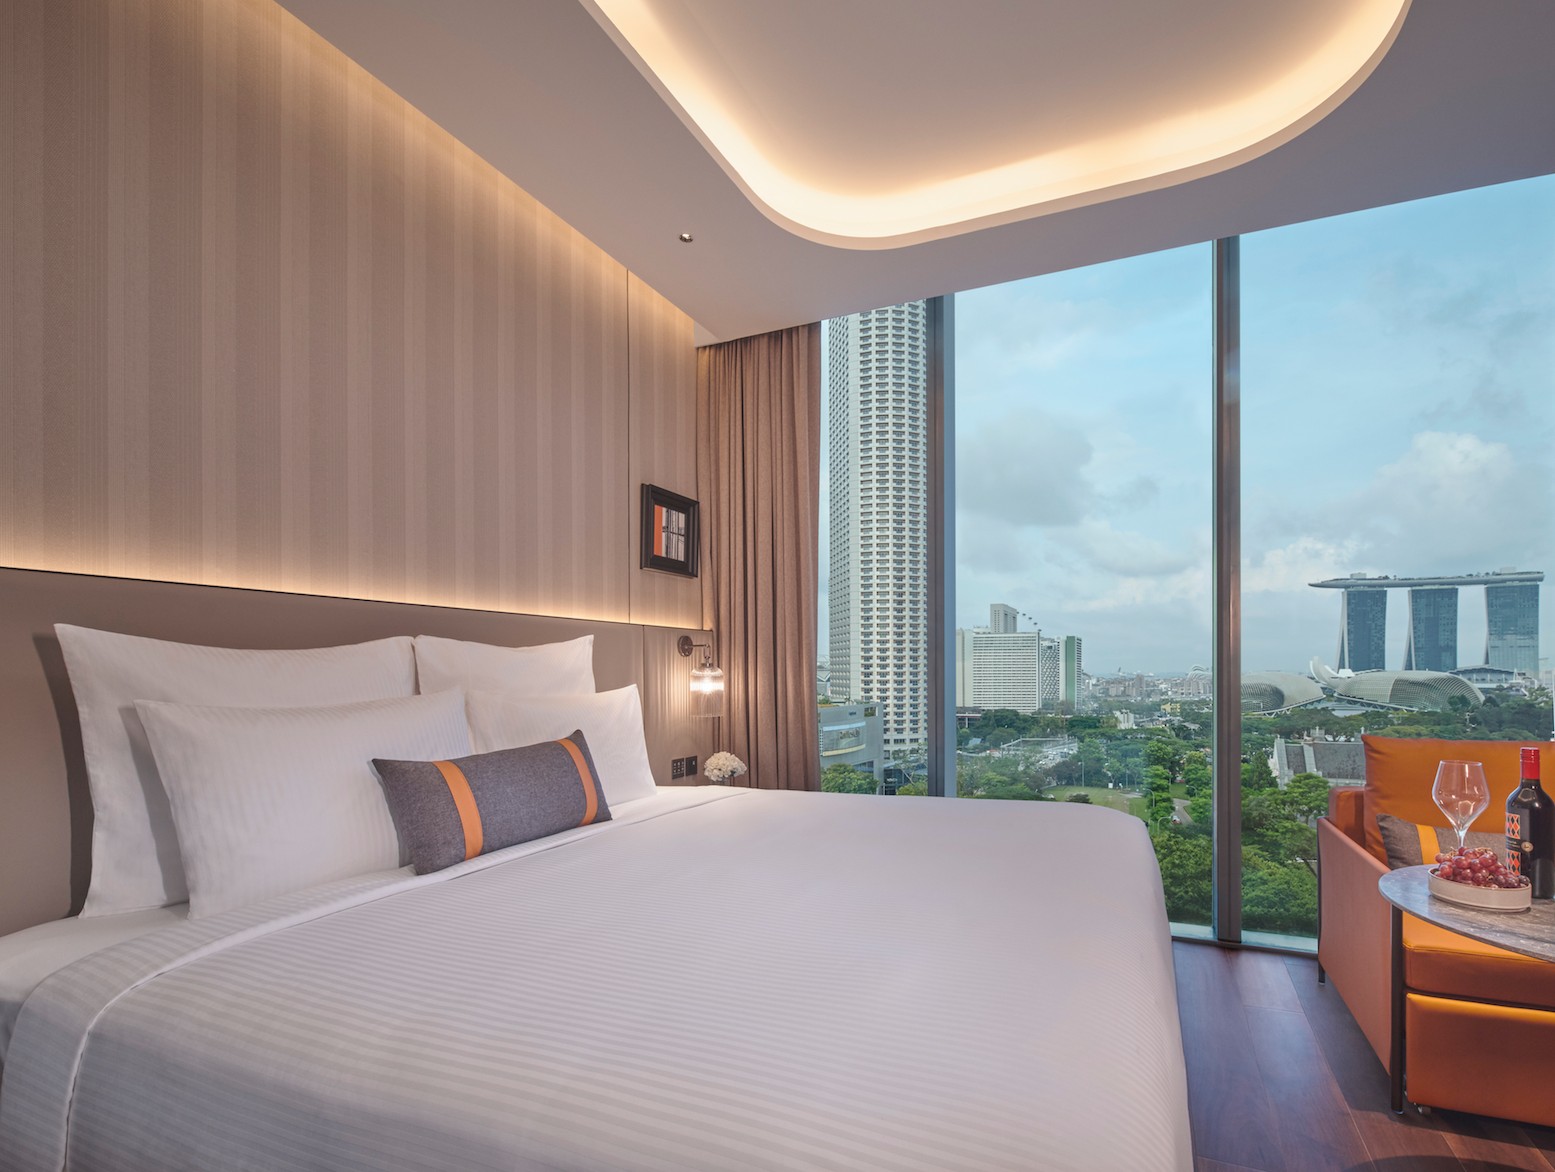 , 4 reasons why Pullman Singapore Hill Street could be your next holiday getaway